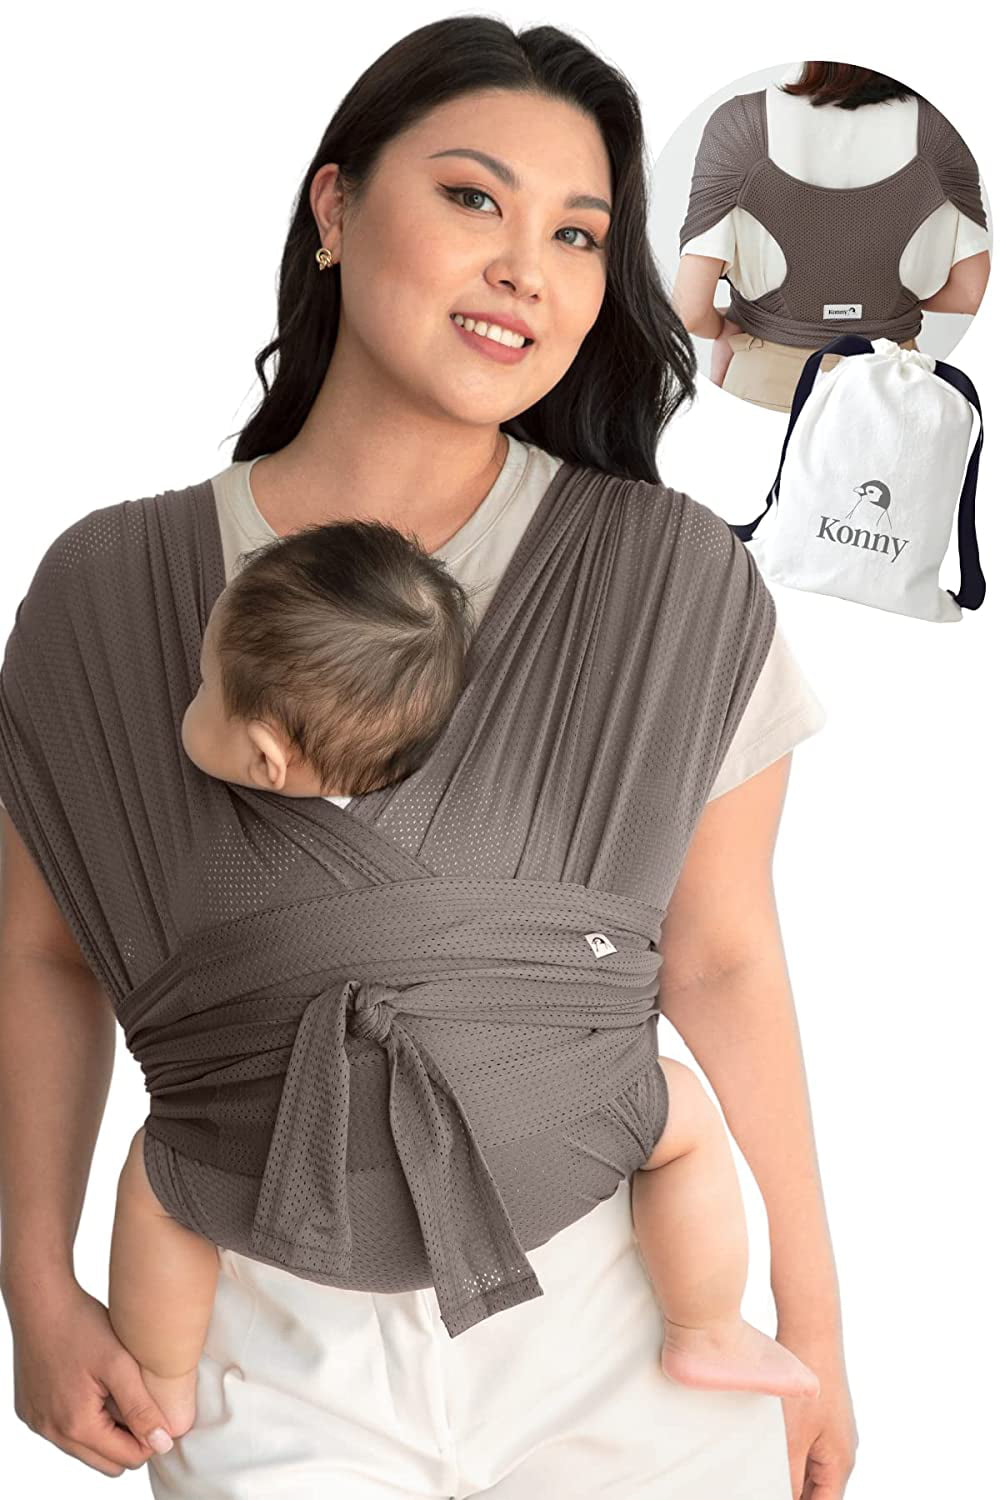 Newborns Konny Baby Carrier Summer Cool and Breathable Fabric Cream, XL Ultra-Lightweight Sensible Sleep Solution Infants to 45 lbs Toddlers Hassle-Free Baby Wrap Sling 